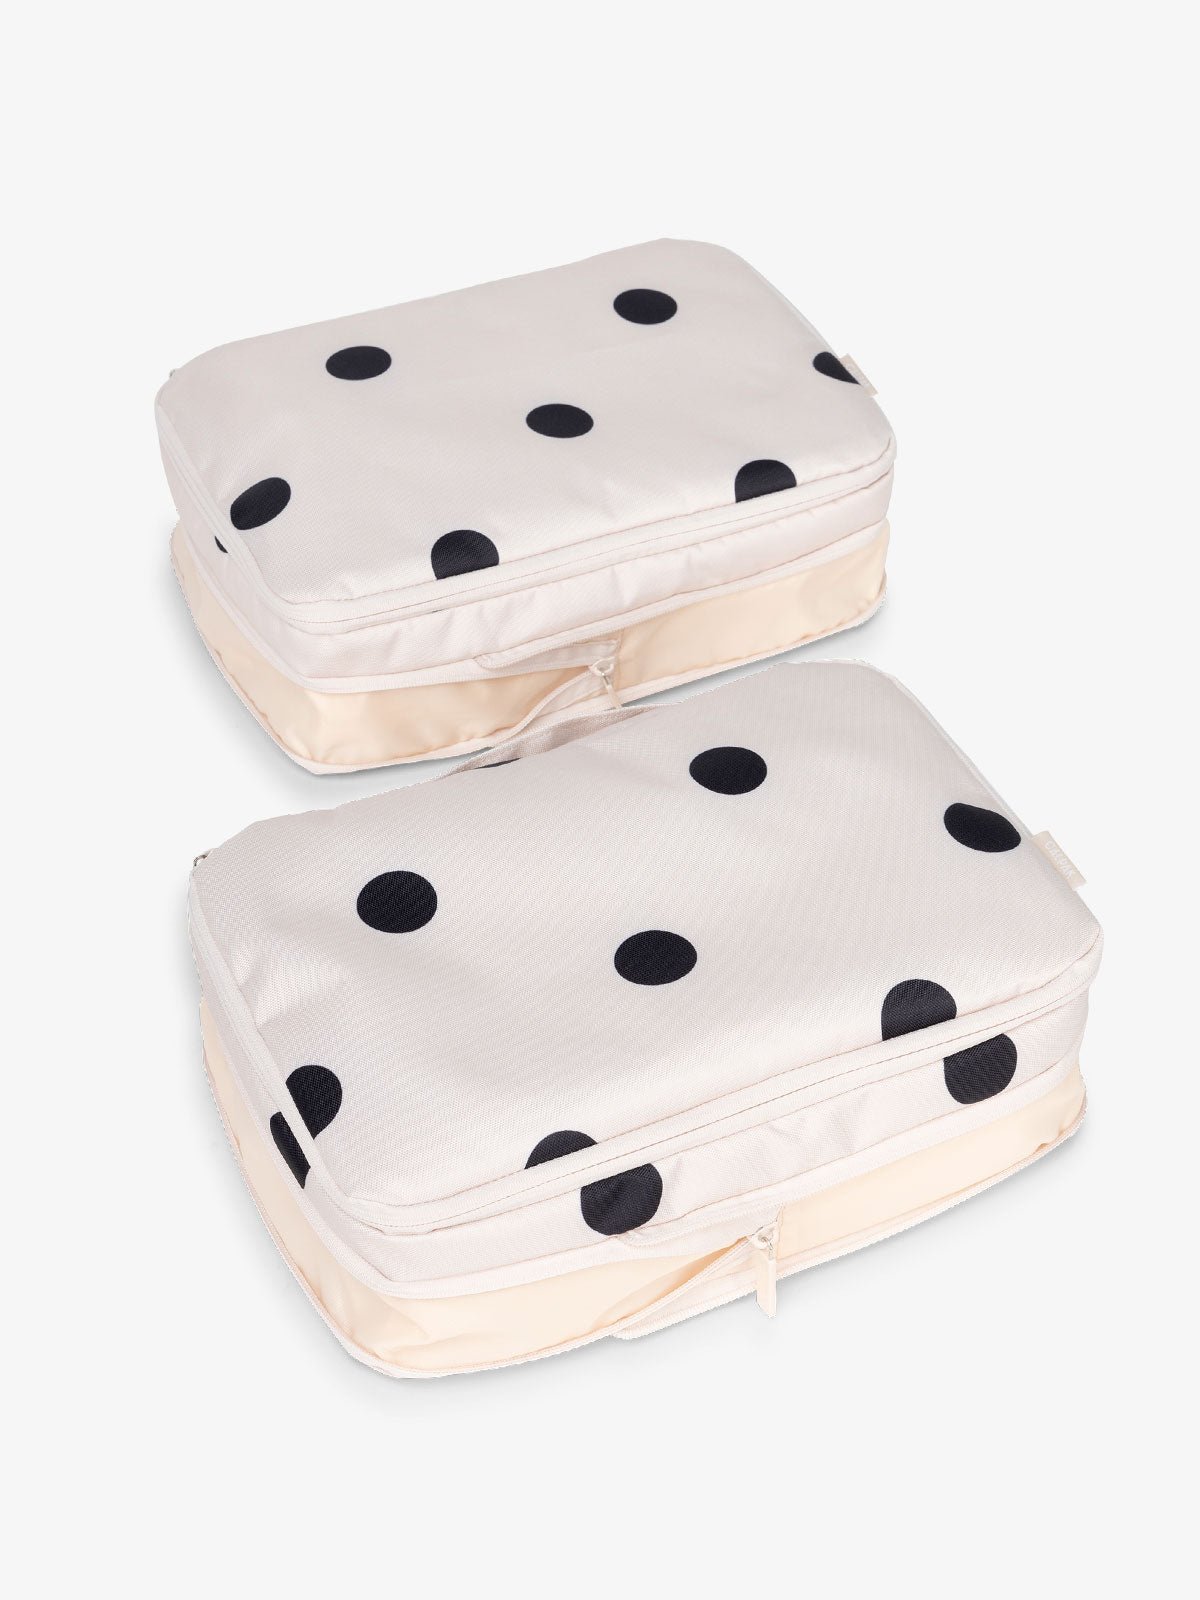 CALPAK large packing cubes with top handles and expandable by 4.5 inches in polka dot